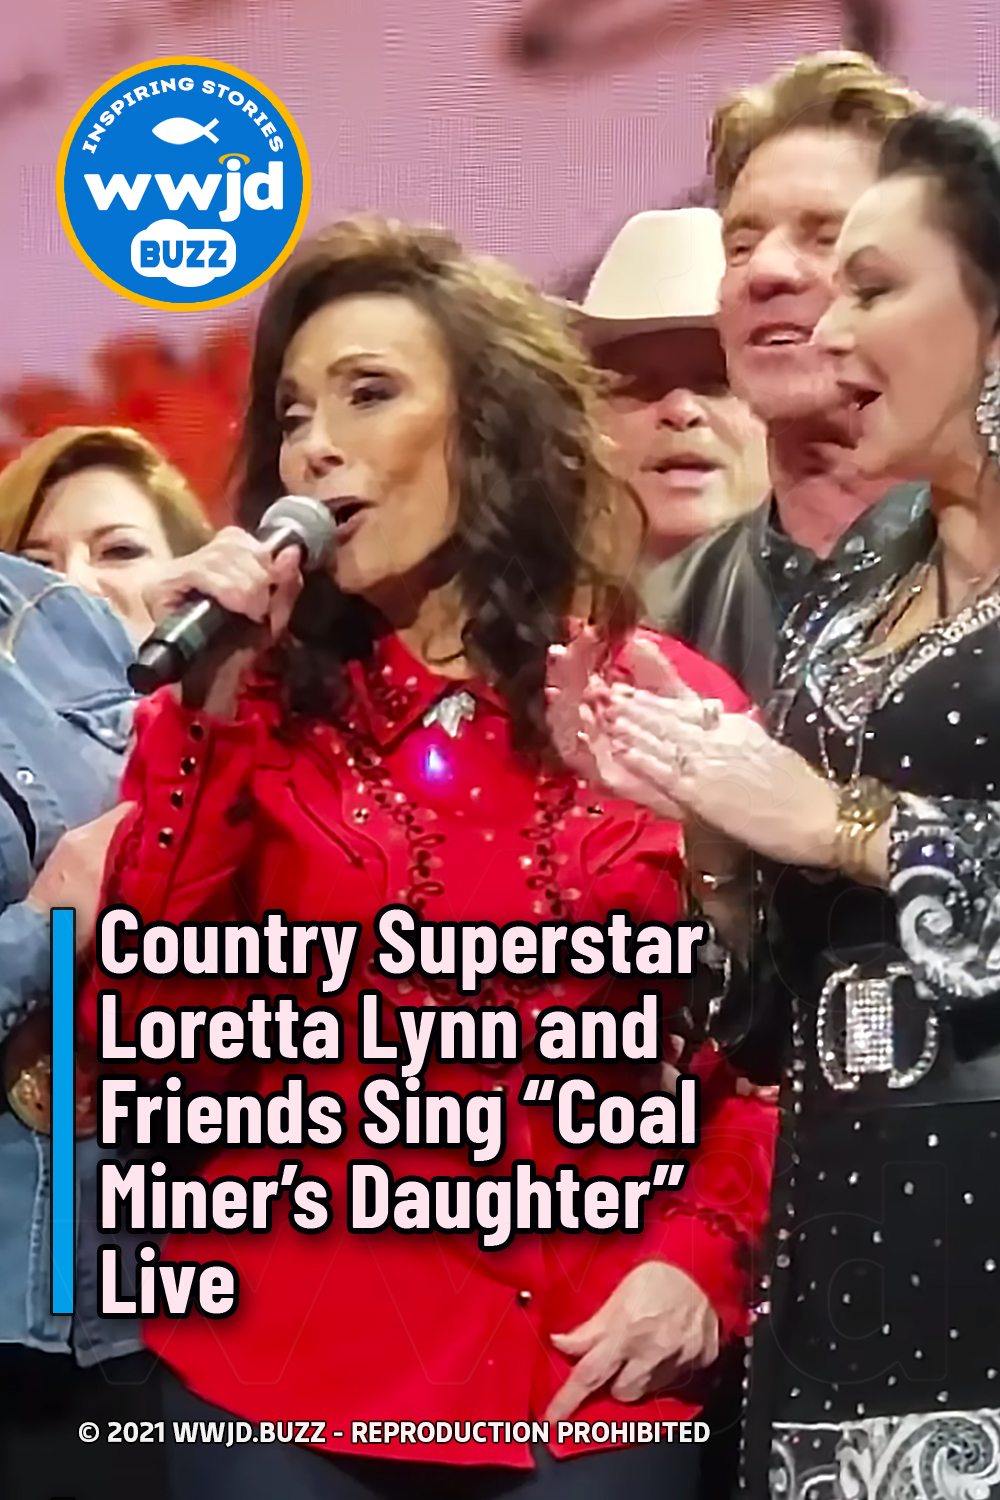 Country Superstar Loretta Lynn and Friends Sing “Coal Miner’s Daughter” Live